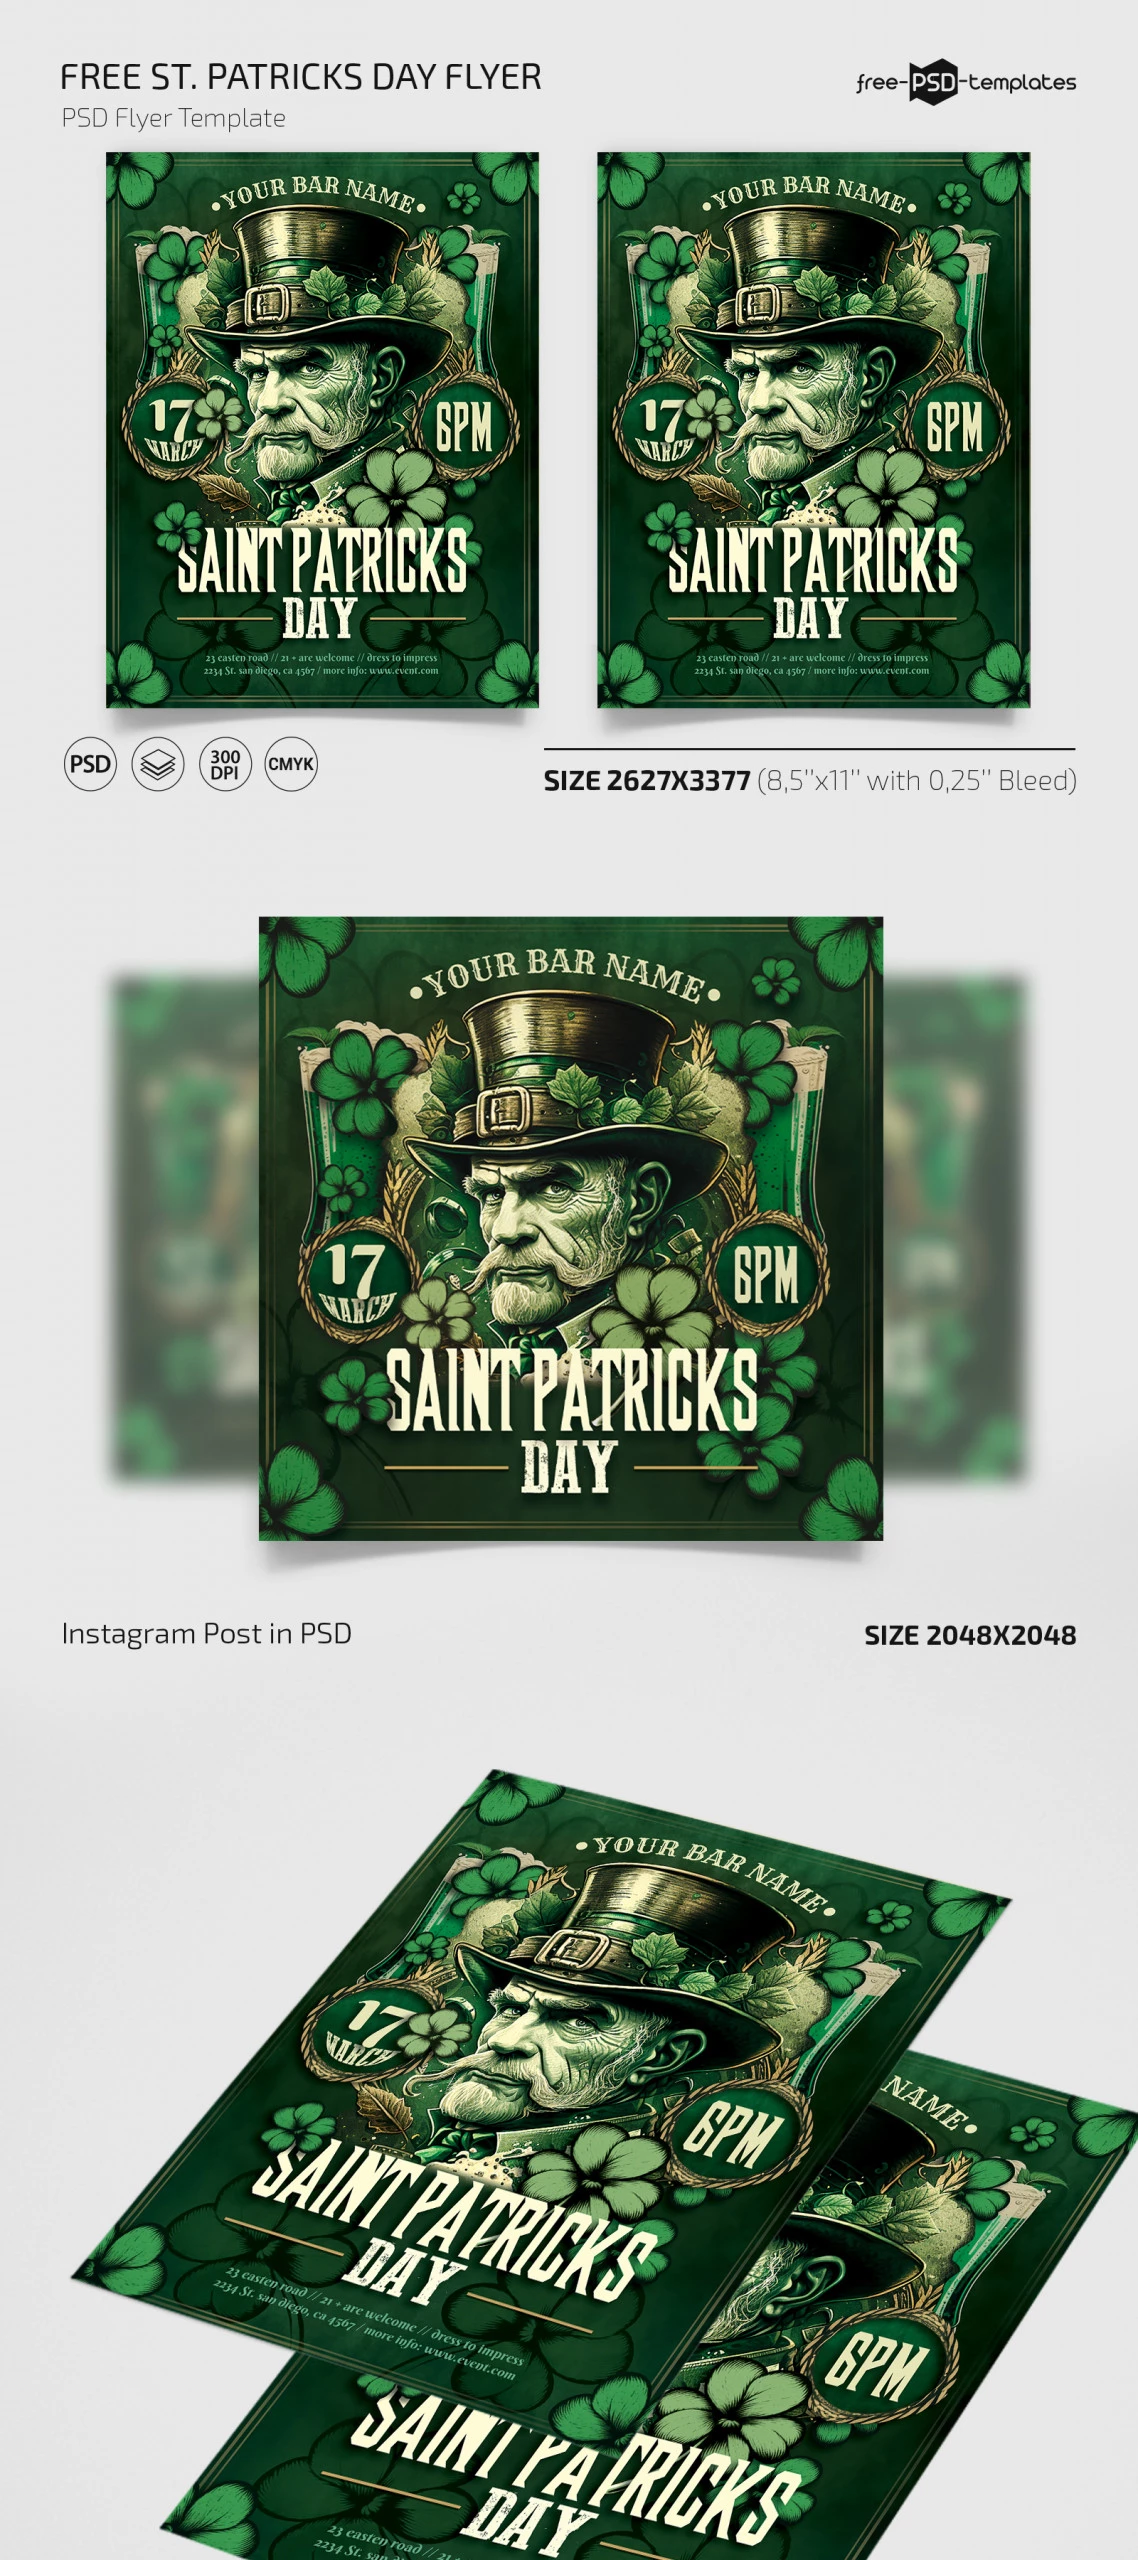 Free St. Patrick’s Day Flyer in PSD